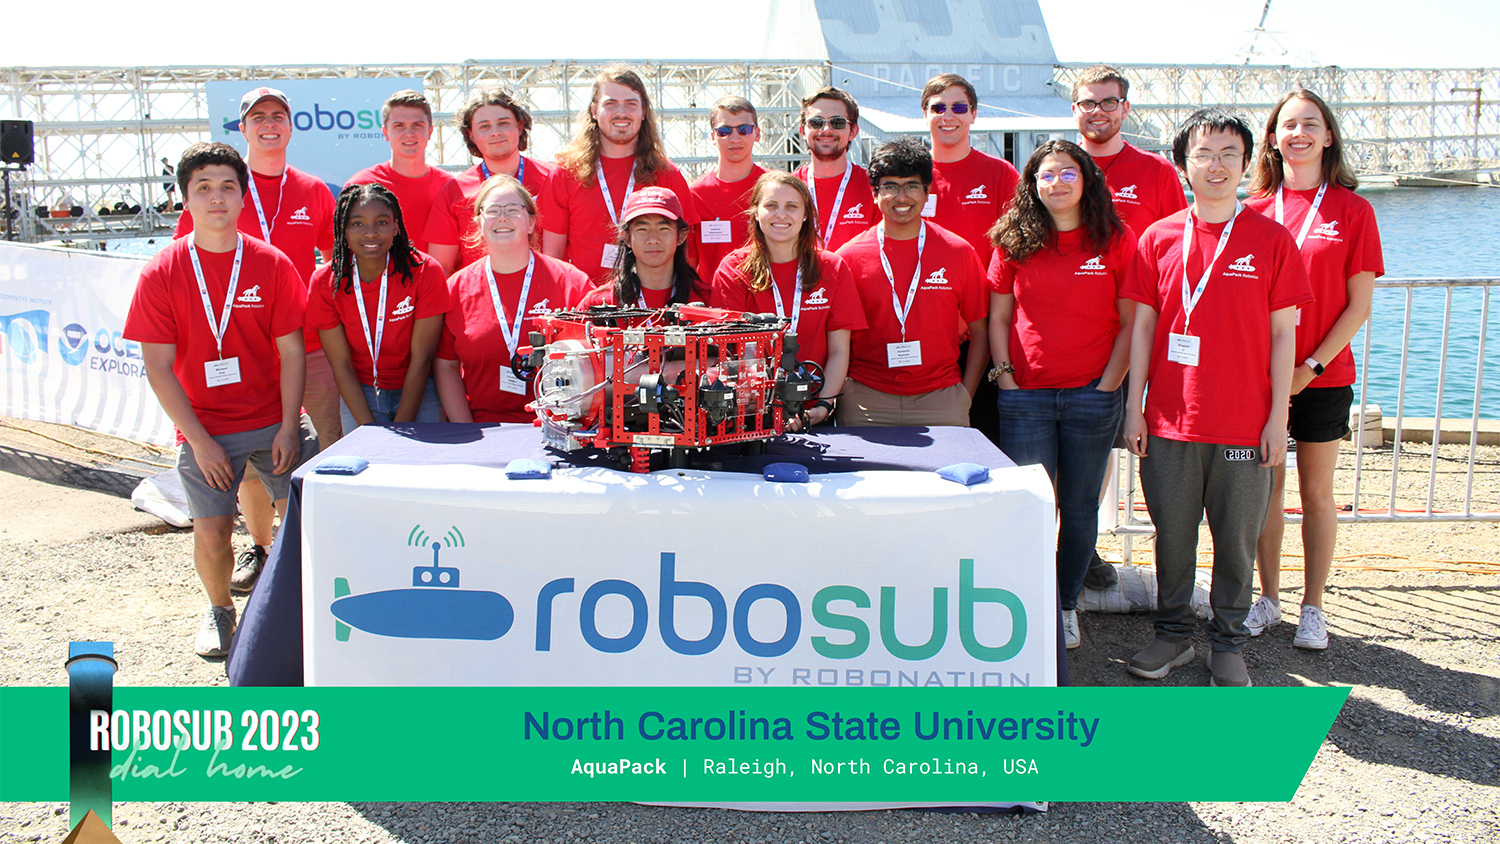 The NC State AquaPack Robosub student-led team poses for a group photo on a sunny day behind their submersible robot which is sitting on a table with a white tablecloth and the Robosub logo in blue and teal on the front.